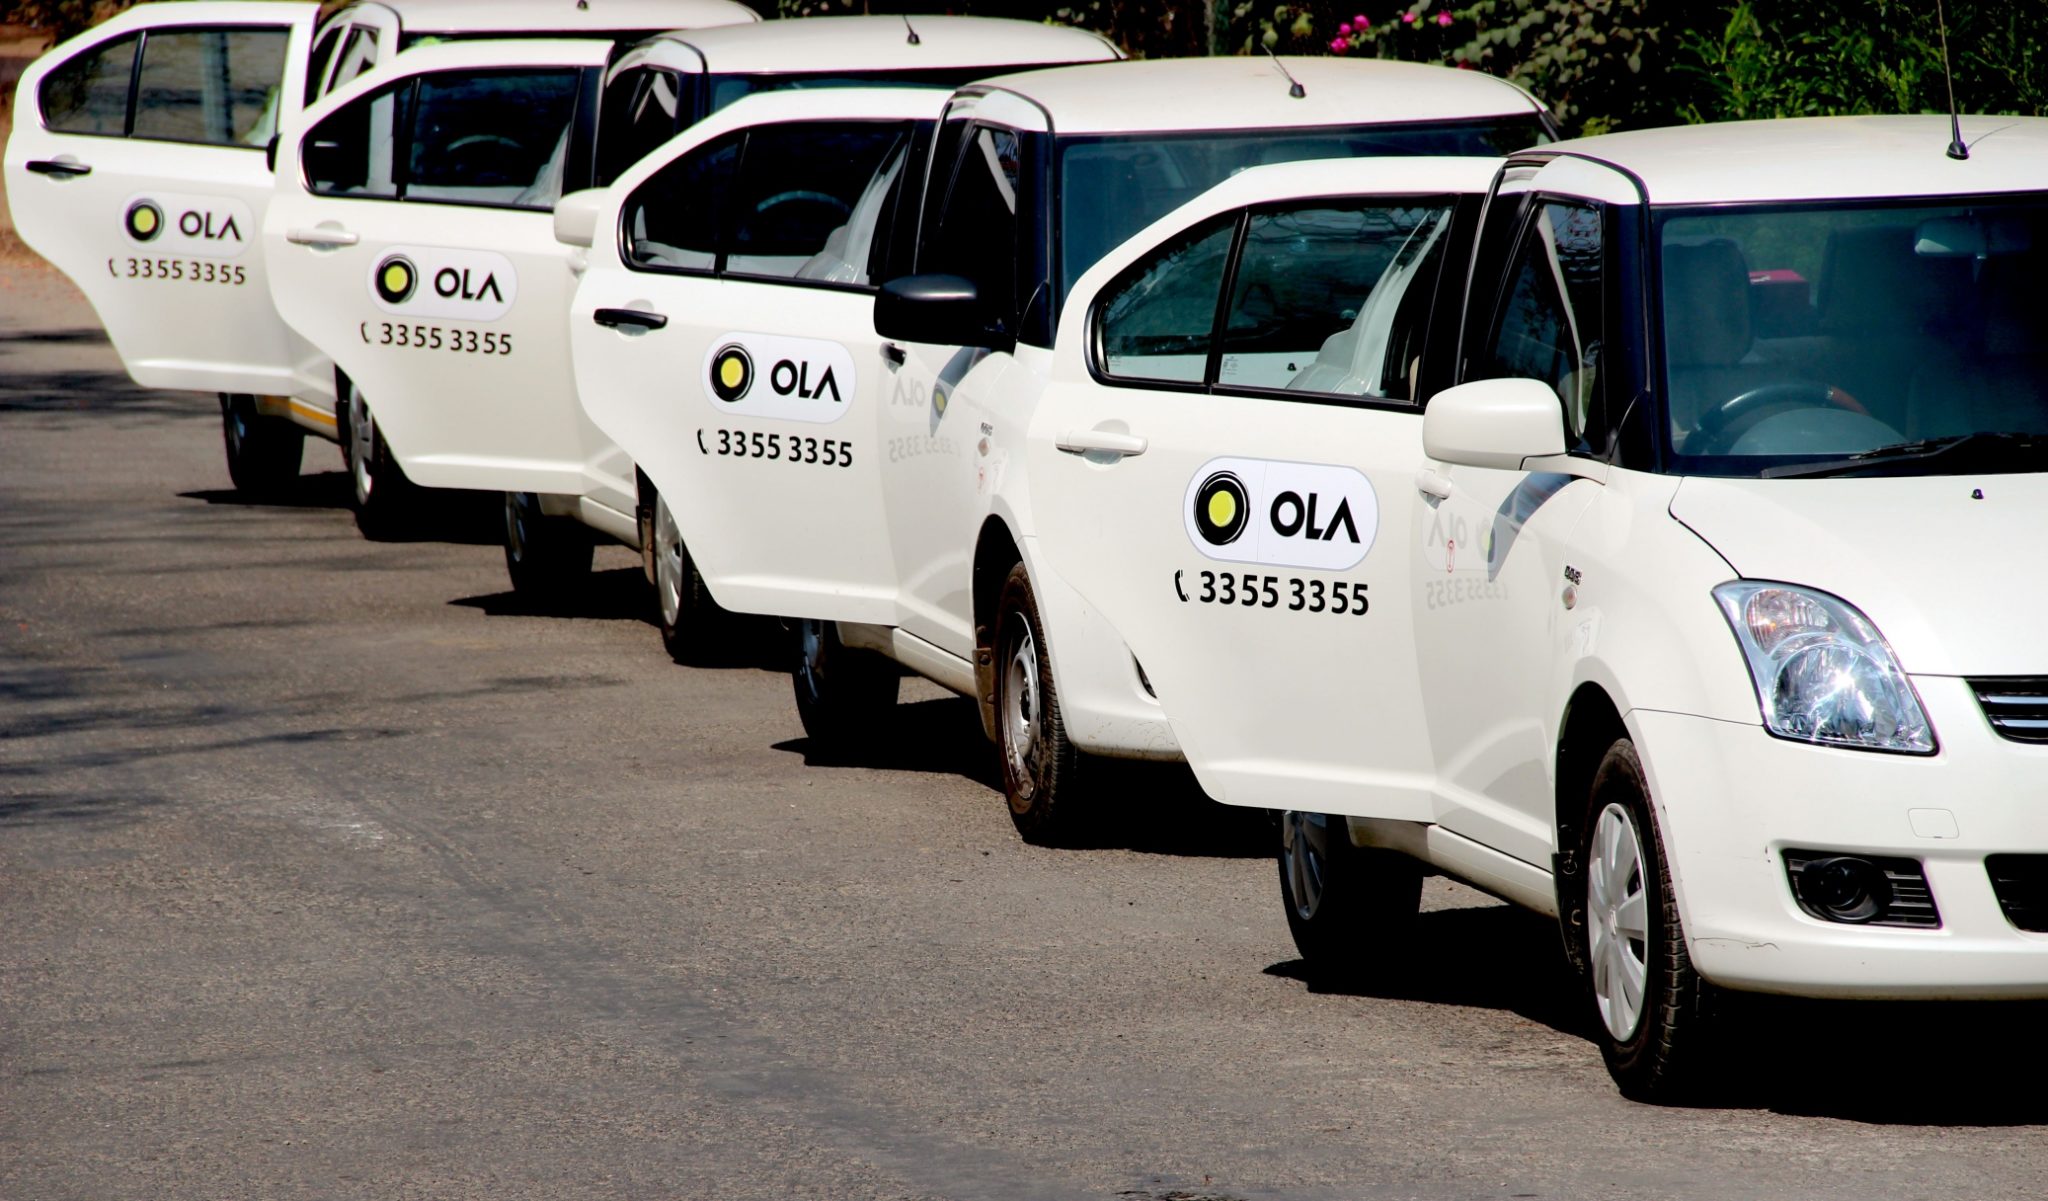 Ola plans to launch services in New Zealand soon